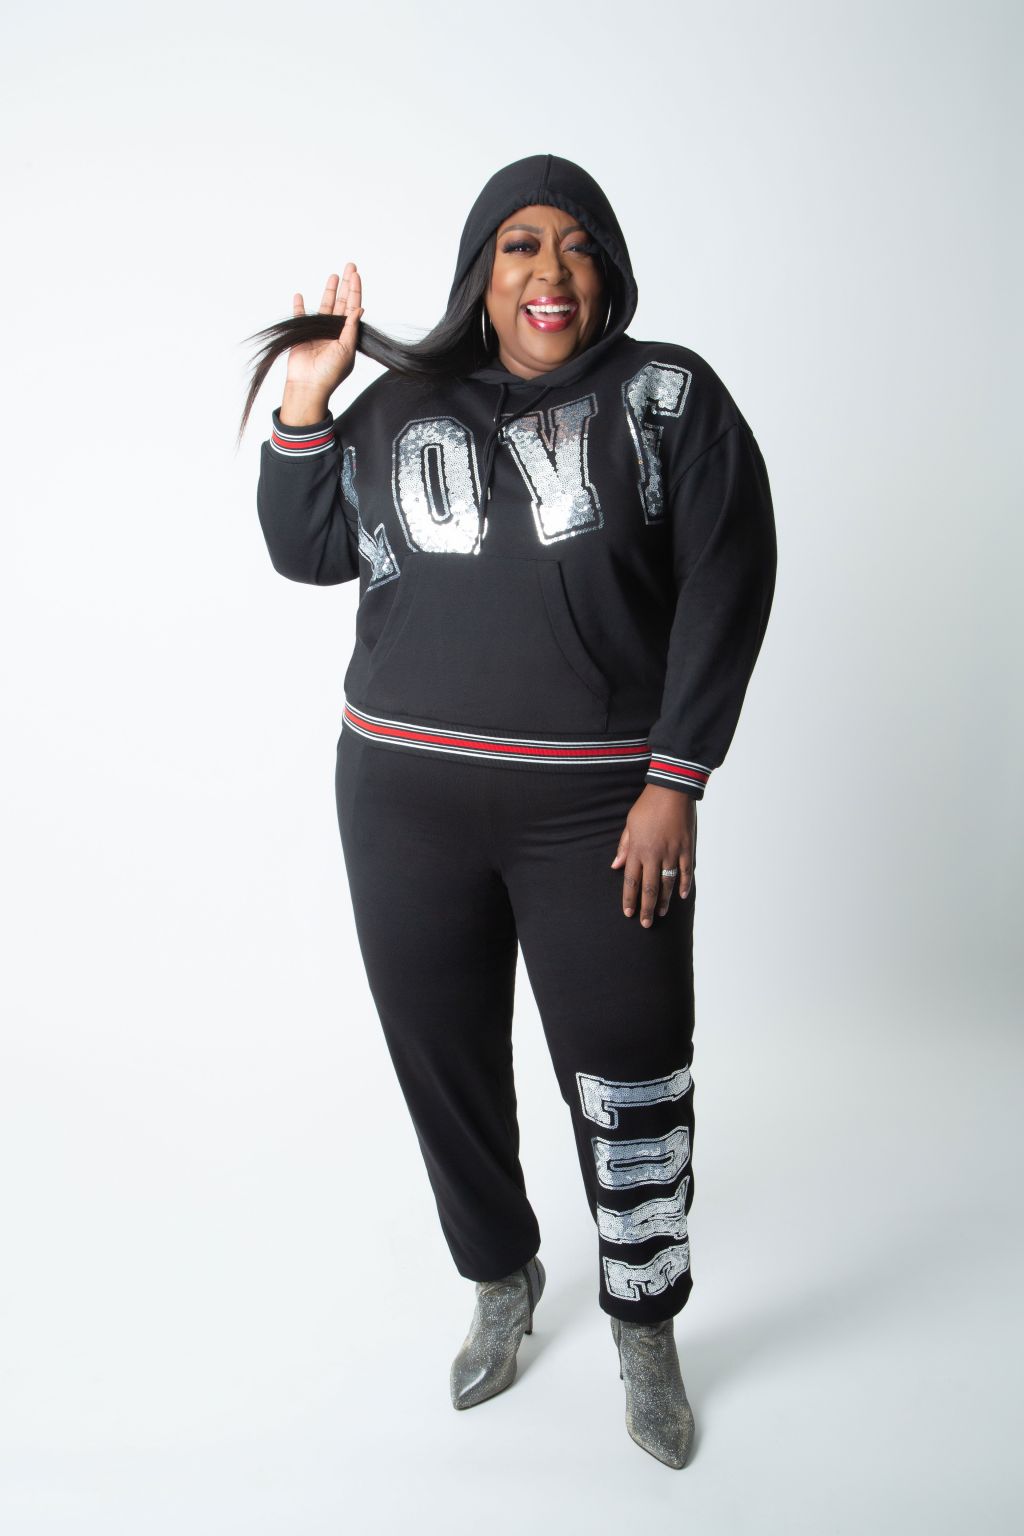 Loni Love Has A Holiday Collaboration With Ashley Stewart